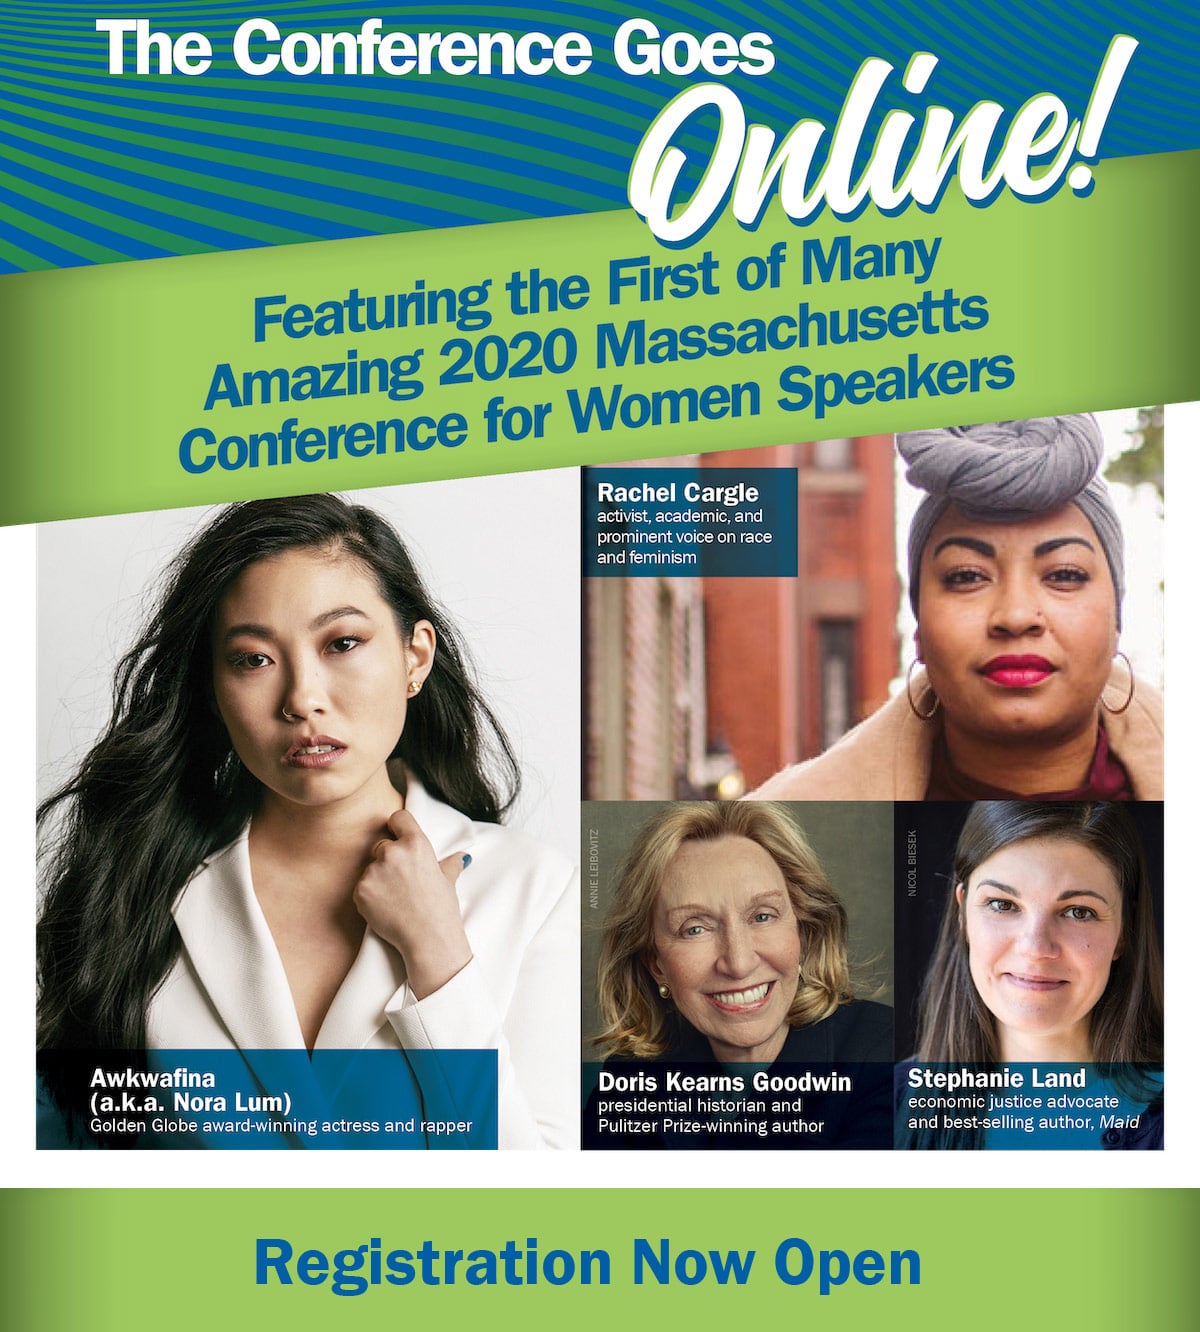 Awkwafina, Doris Kearns Goodwin, Rachel Cargle, and Stephanie Land! The first of many amazing 2020 Conference for Women speaker announcements